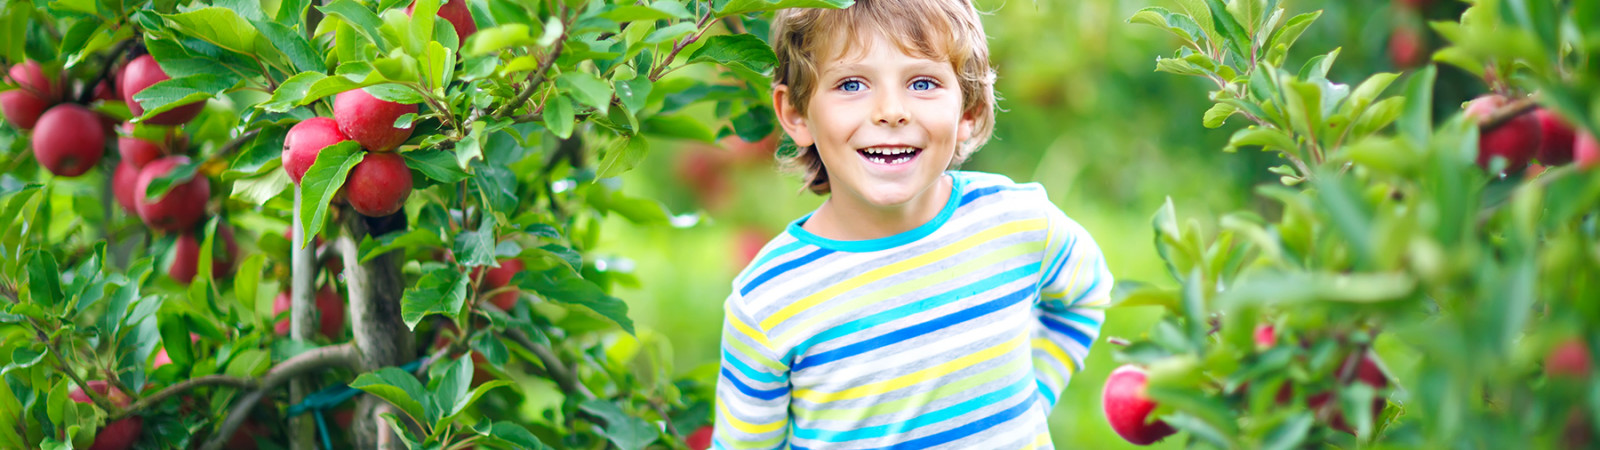 Active happy blond kid boy picking and eating red apples on organic farm, autumn outdoors